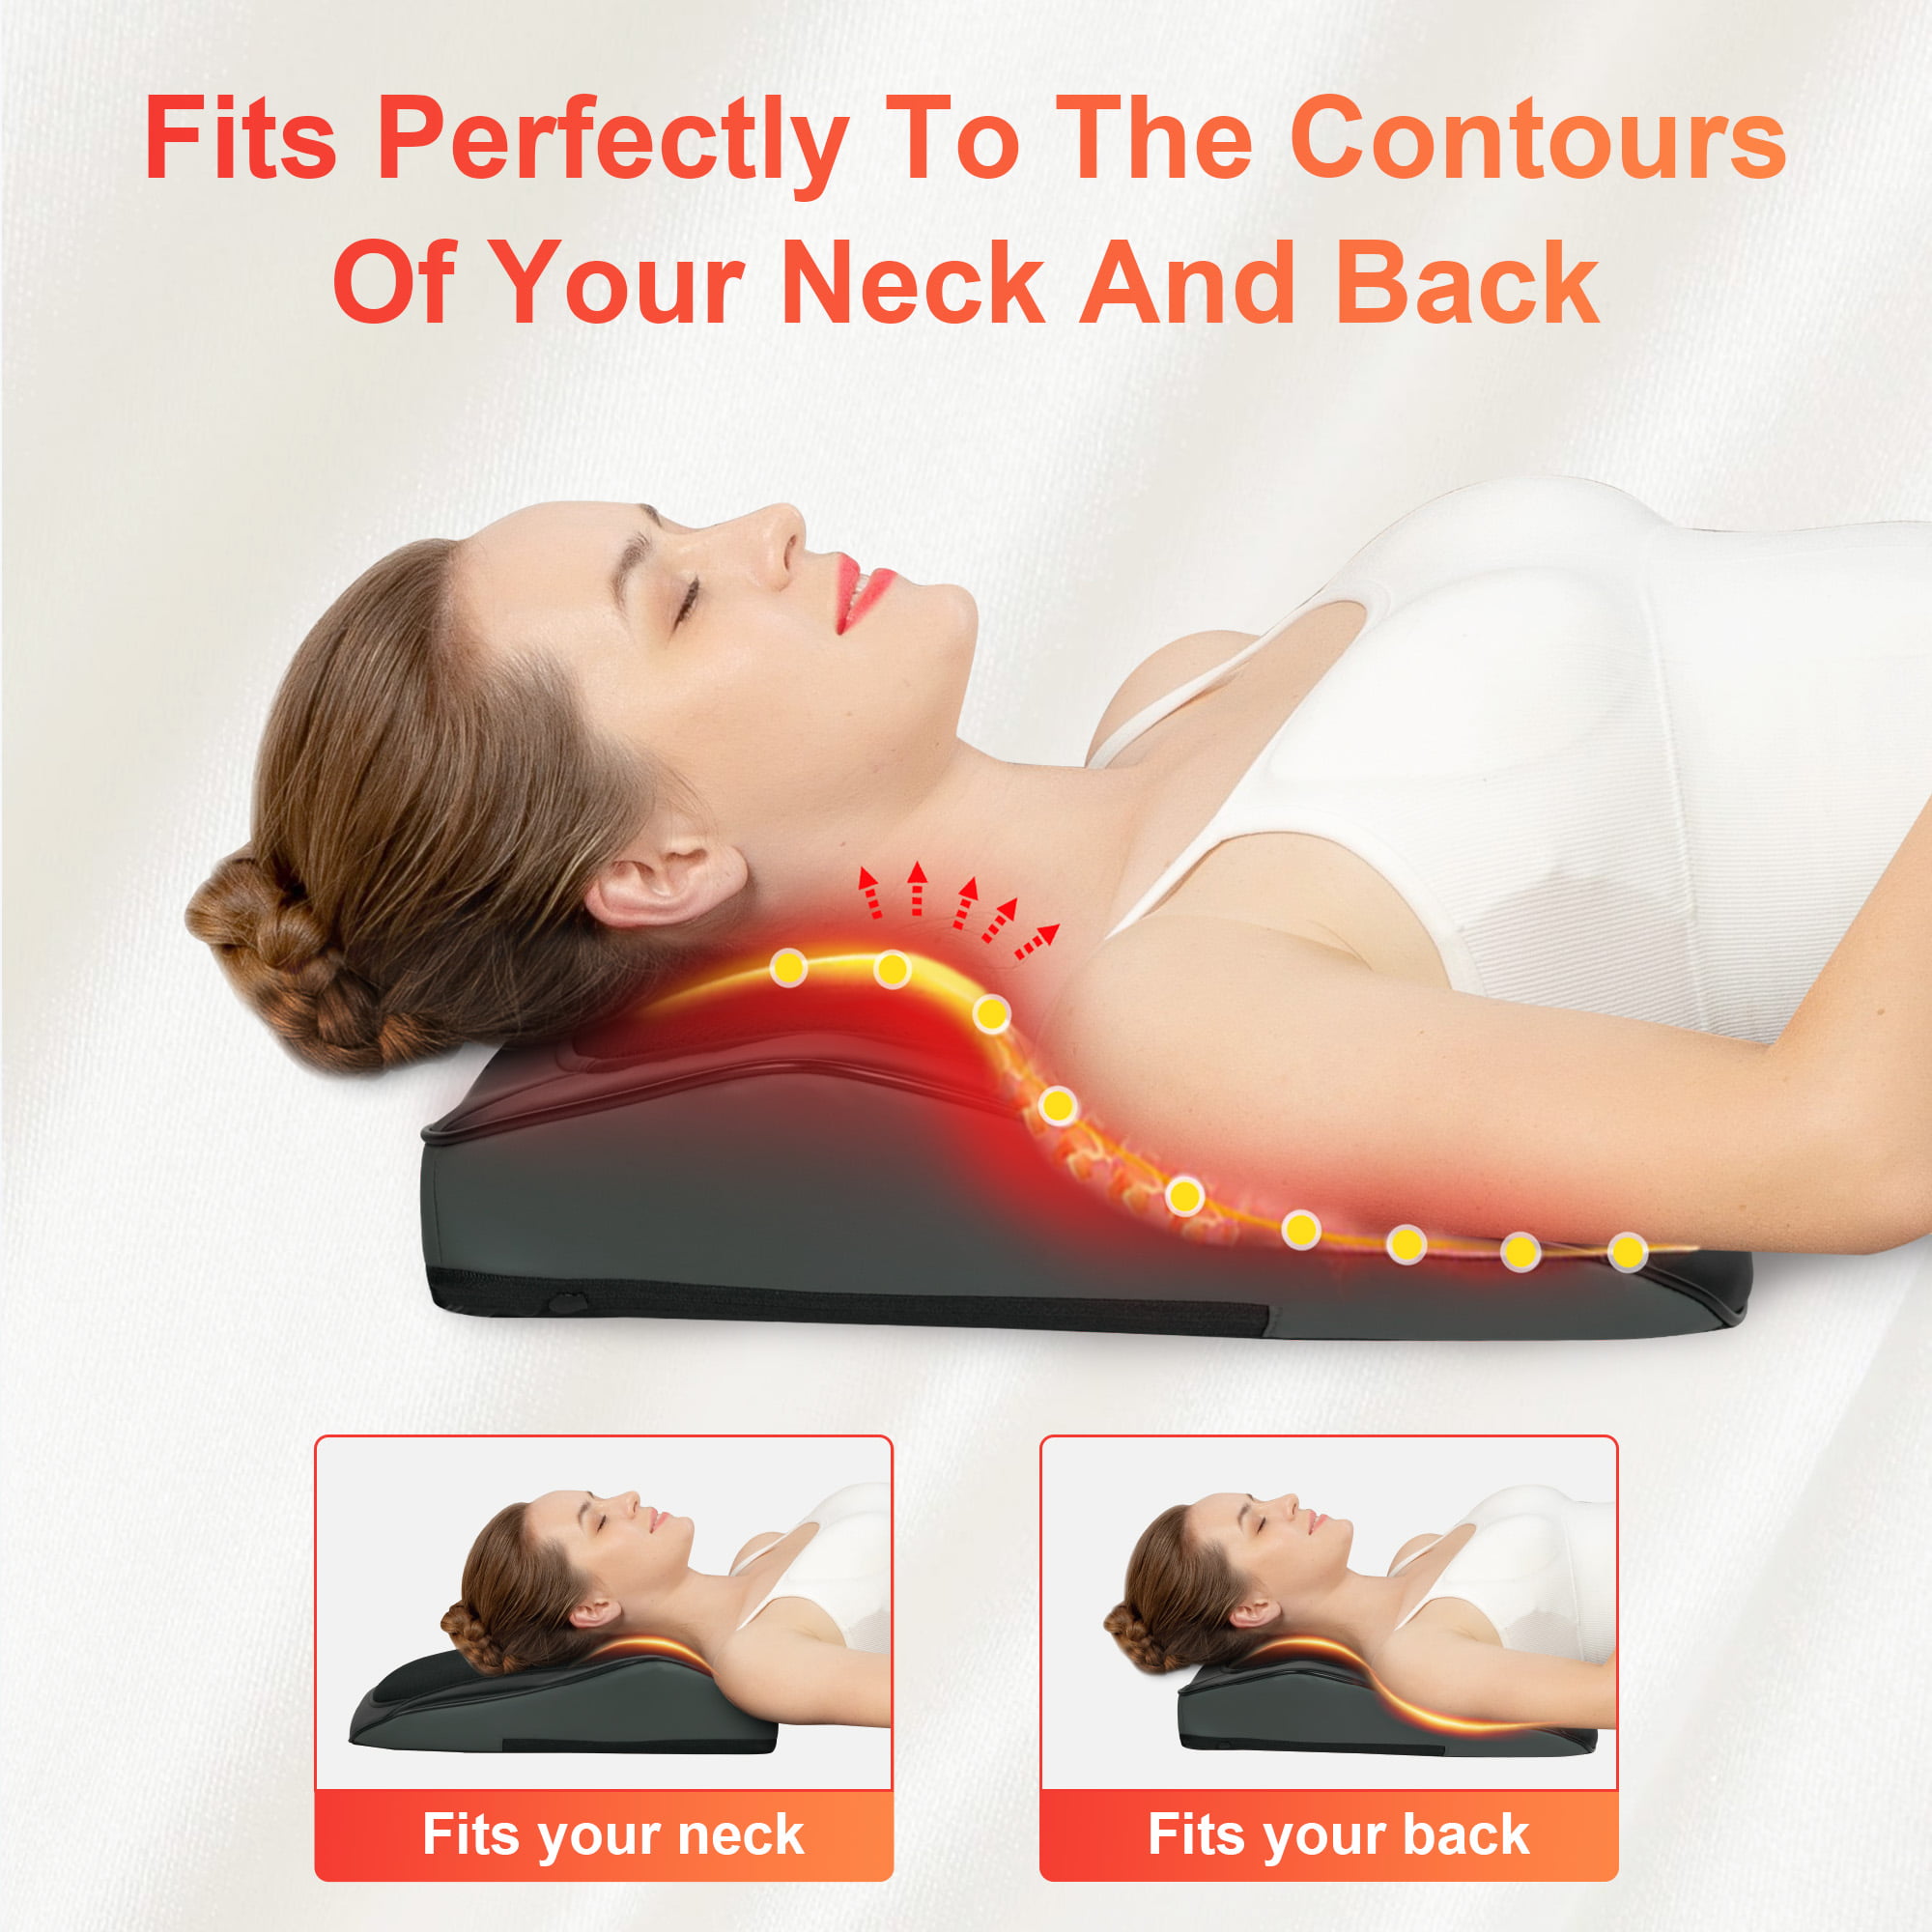 Used COMFIER CF-6302 Shiatsu Neck and Shoulder Back Massager,Massage Pillow  with Heat,Best Gift for Men/Women/Mom/Dad. For Sale - DOTmed Listing  #4669193